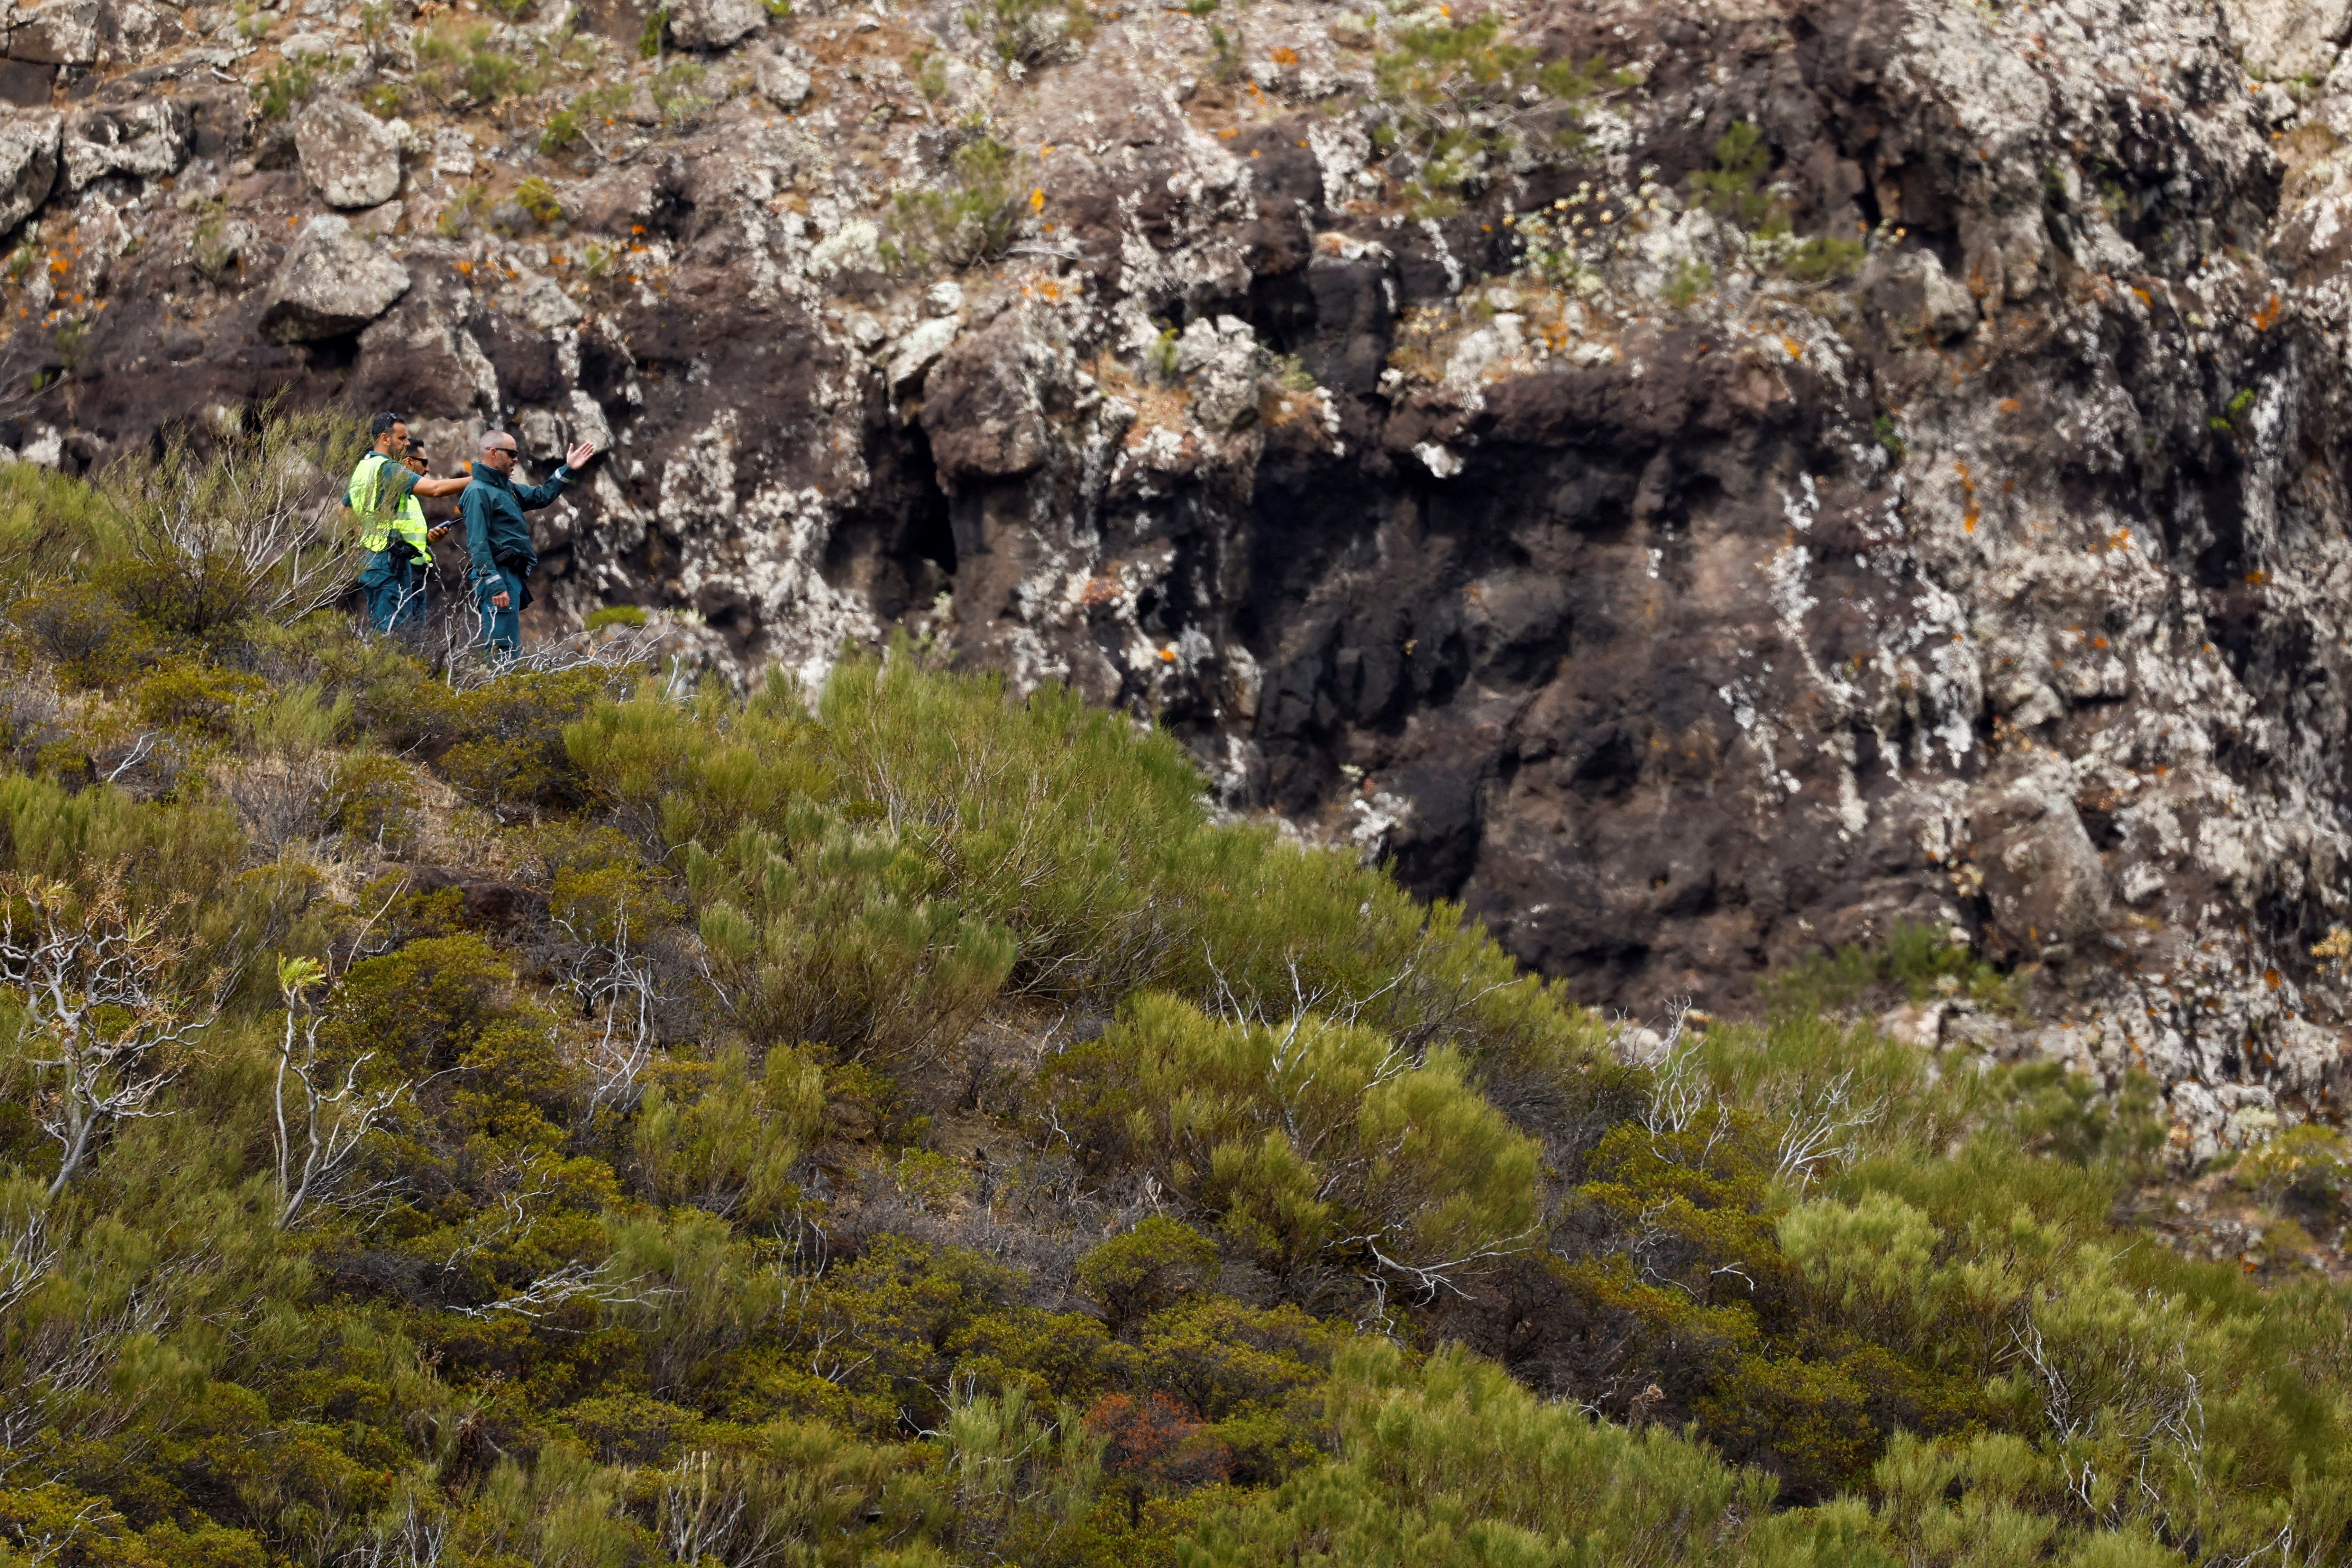 Police officers search for a missing British youth in the Masca ravine on the island of Tenerife in Spain on Thursday